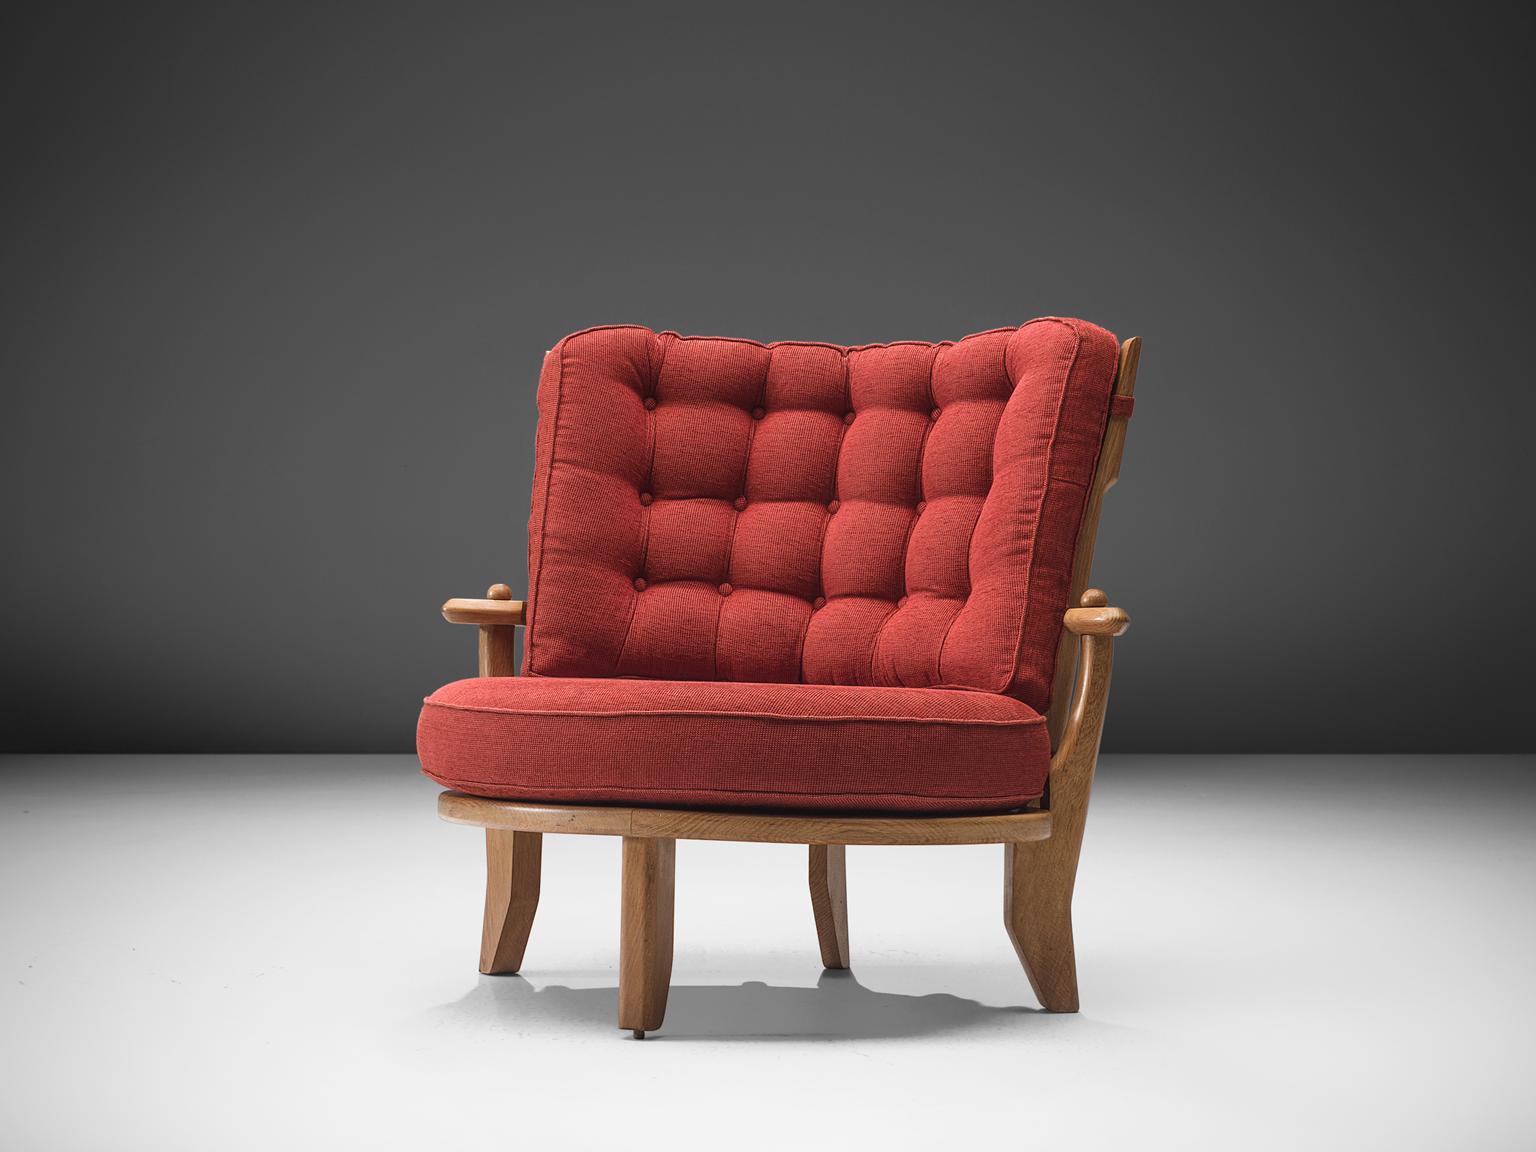 Guillerme et Chambron, lounge chair, oak, red upholstery, France, 1940s. 

This lounge chair or love chair has a classic Guillerme & Chambron style. It is bulky but beautifully made, with attention to detail and comfort. Guillerme and Chambron are